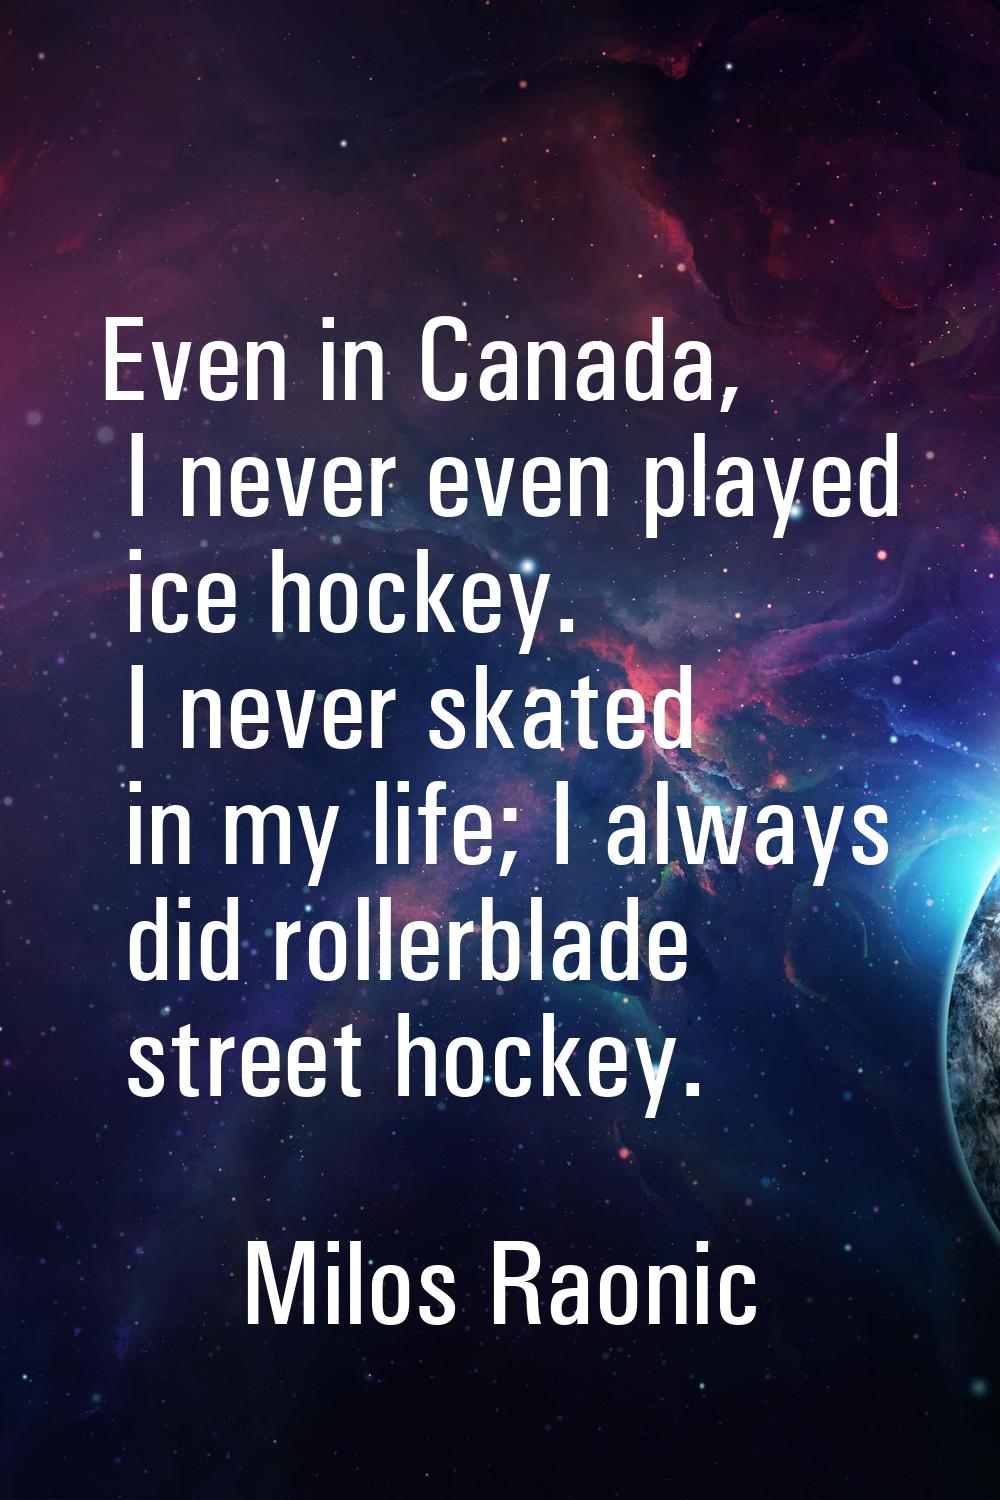 Even in Canada, I never even played ice hockey. I never skated in my life; I always did rollerblade